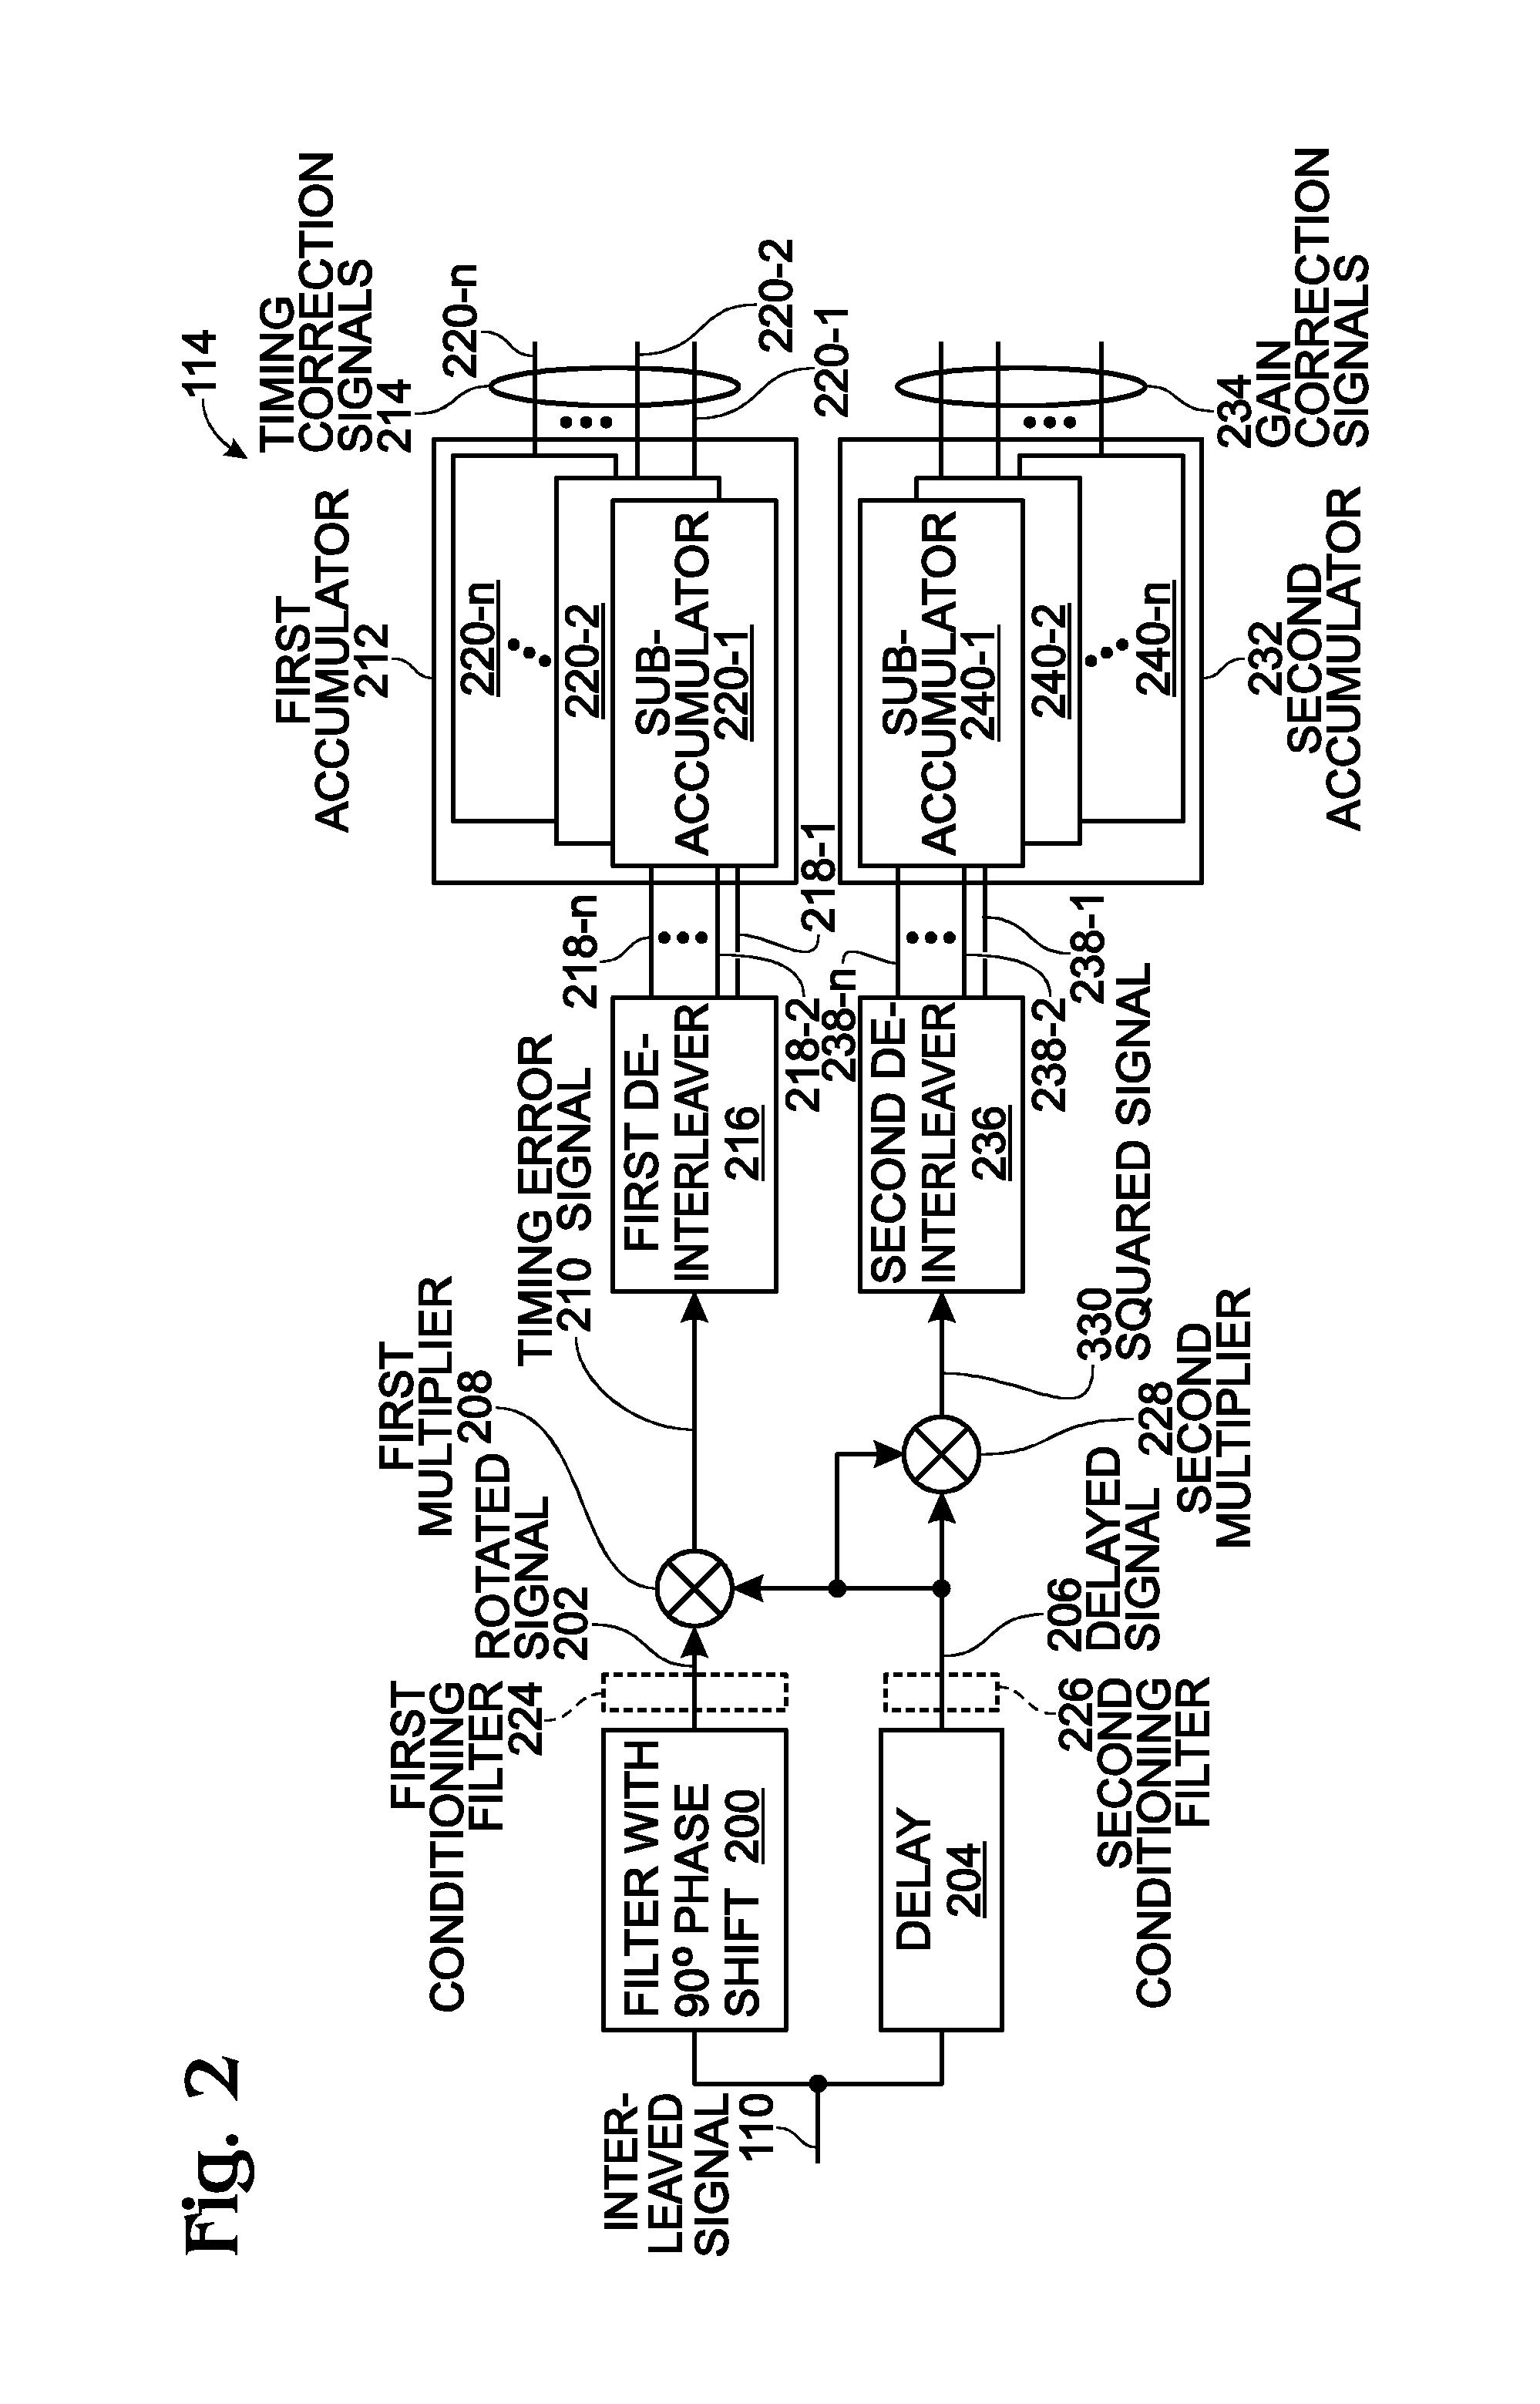 N-Path Interleaving Analog-to-Digital Converter (ADC) with Offset gain and Timing Mismatch Calibration